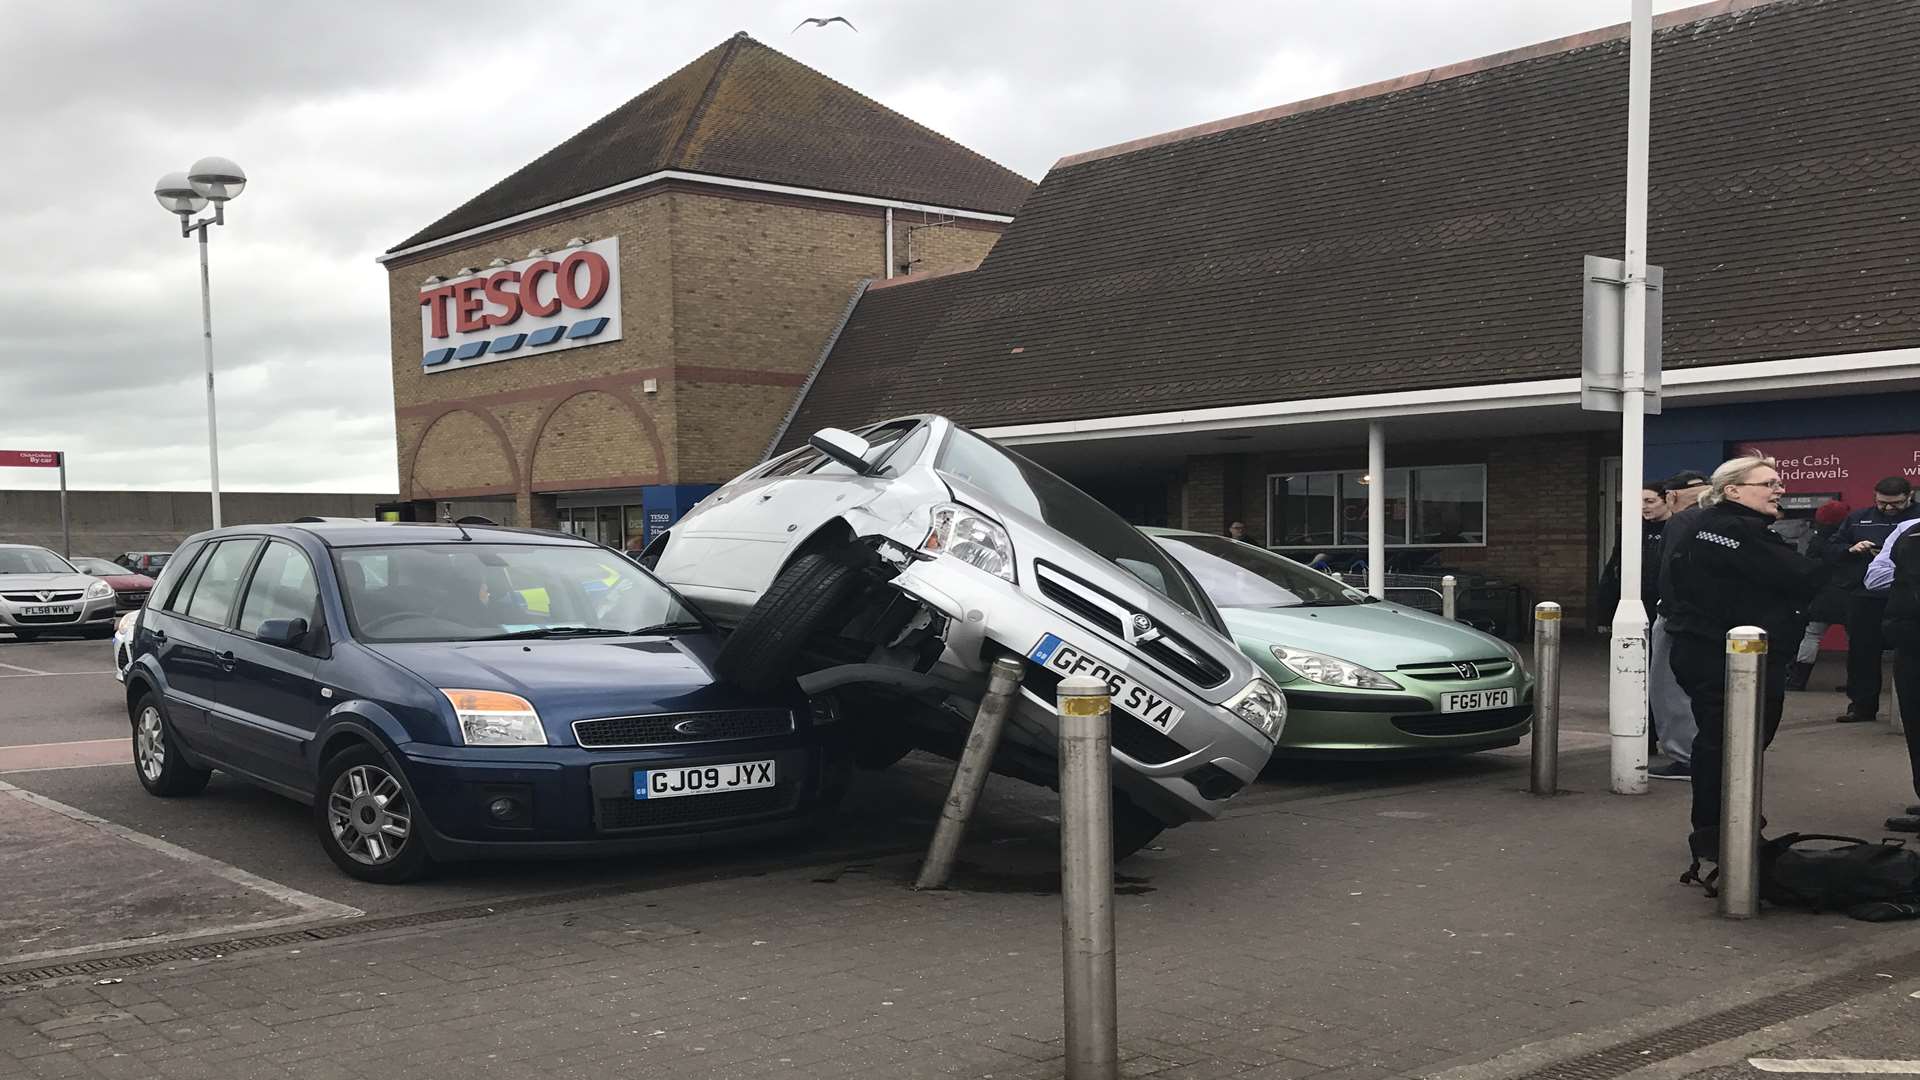 The car ended up on top of another vehicle